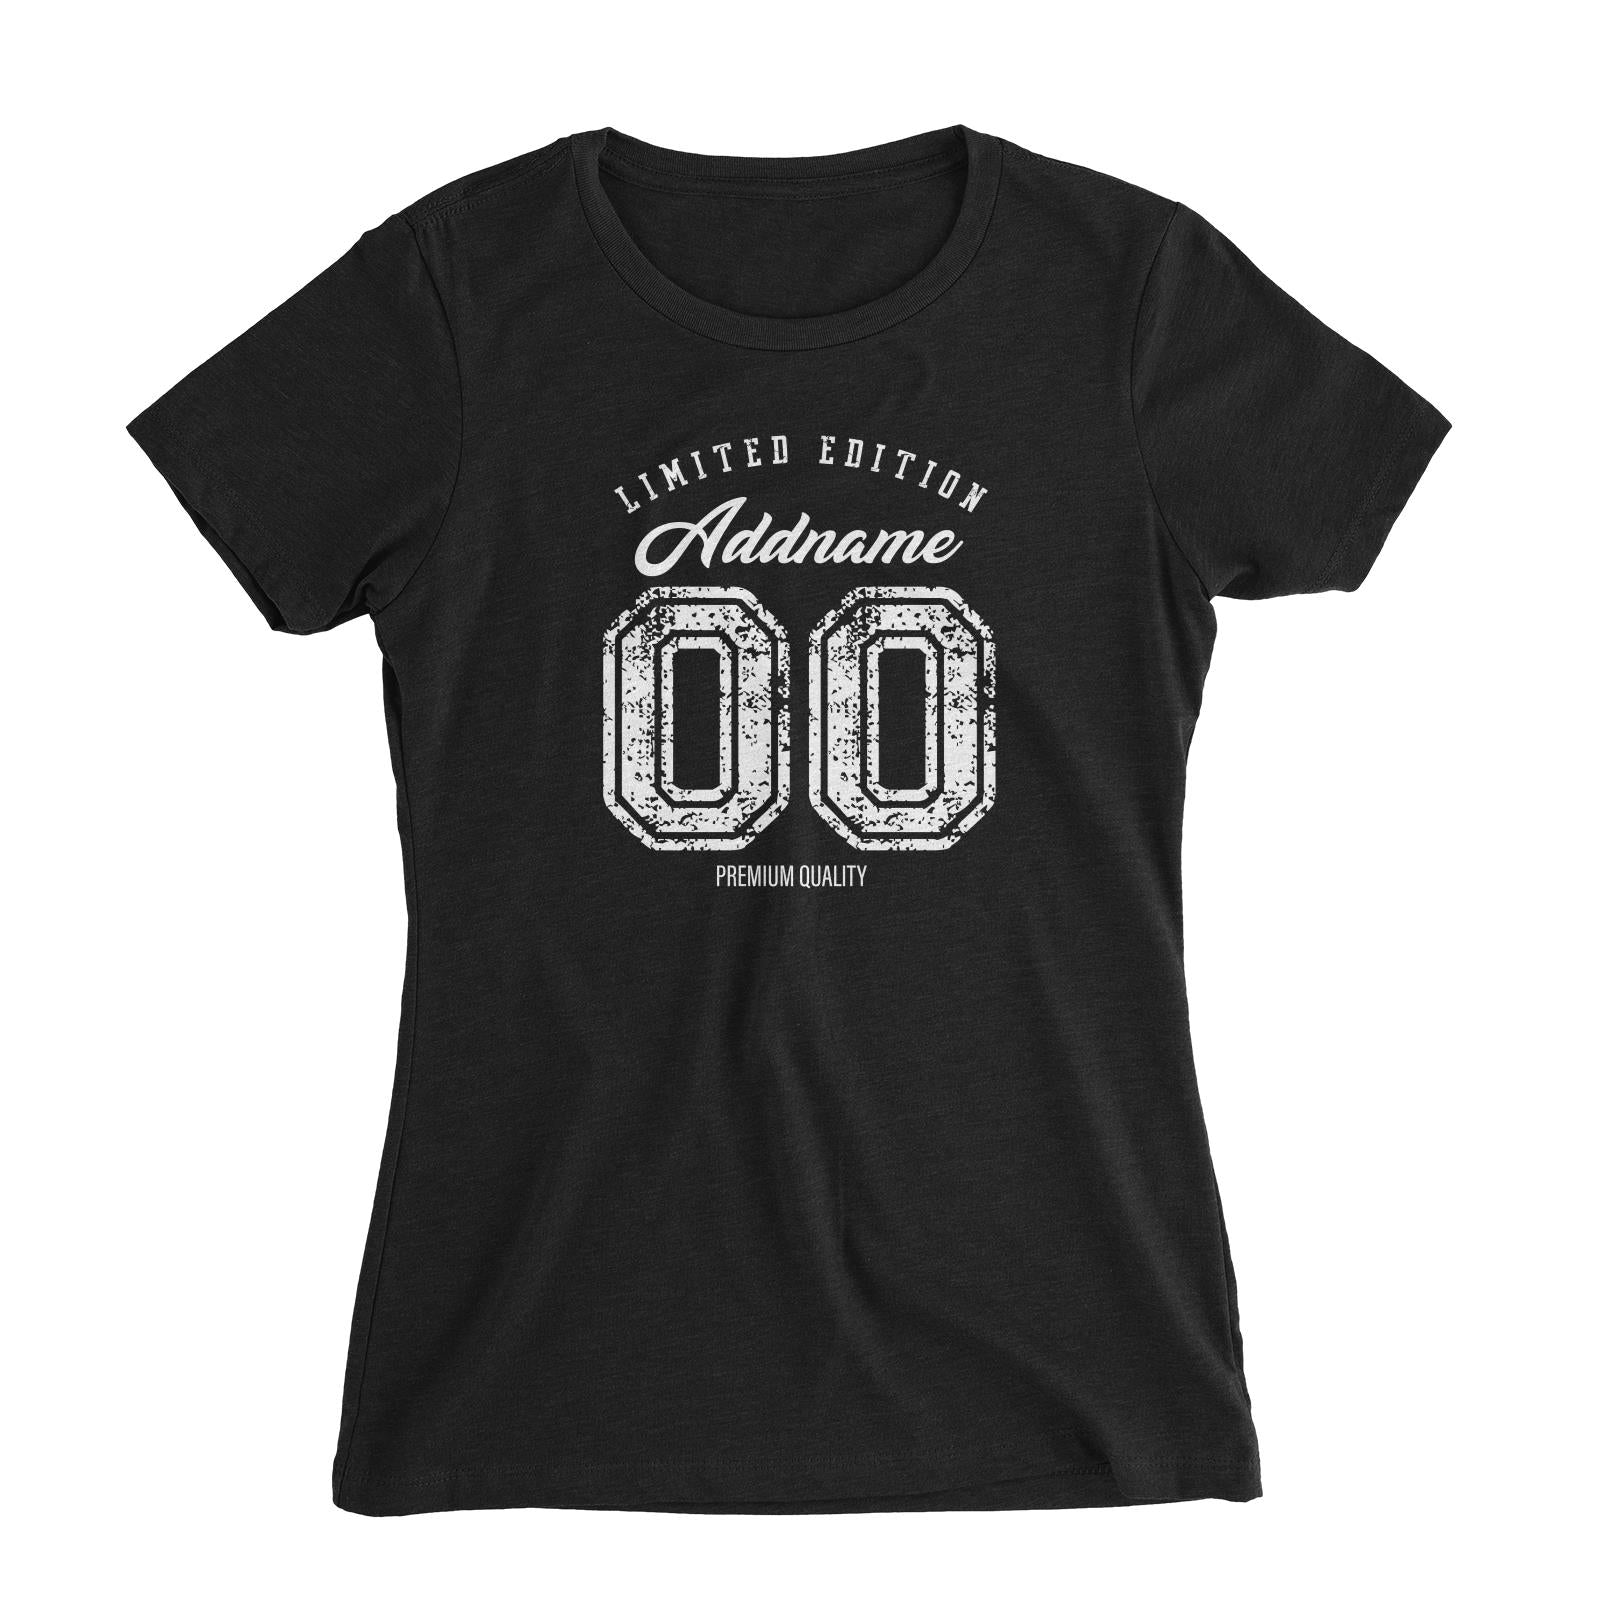 Limited Edition Premium Quality Personalizable with Name and Number Women's Slim Fit T-Shirt